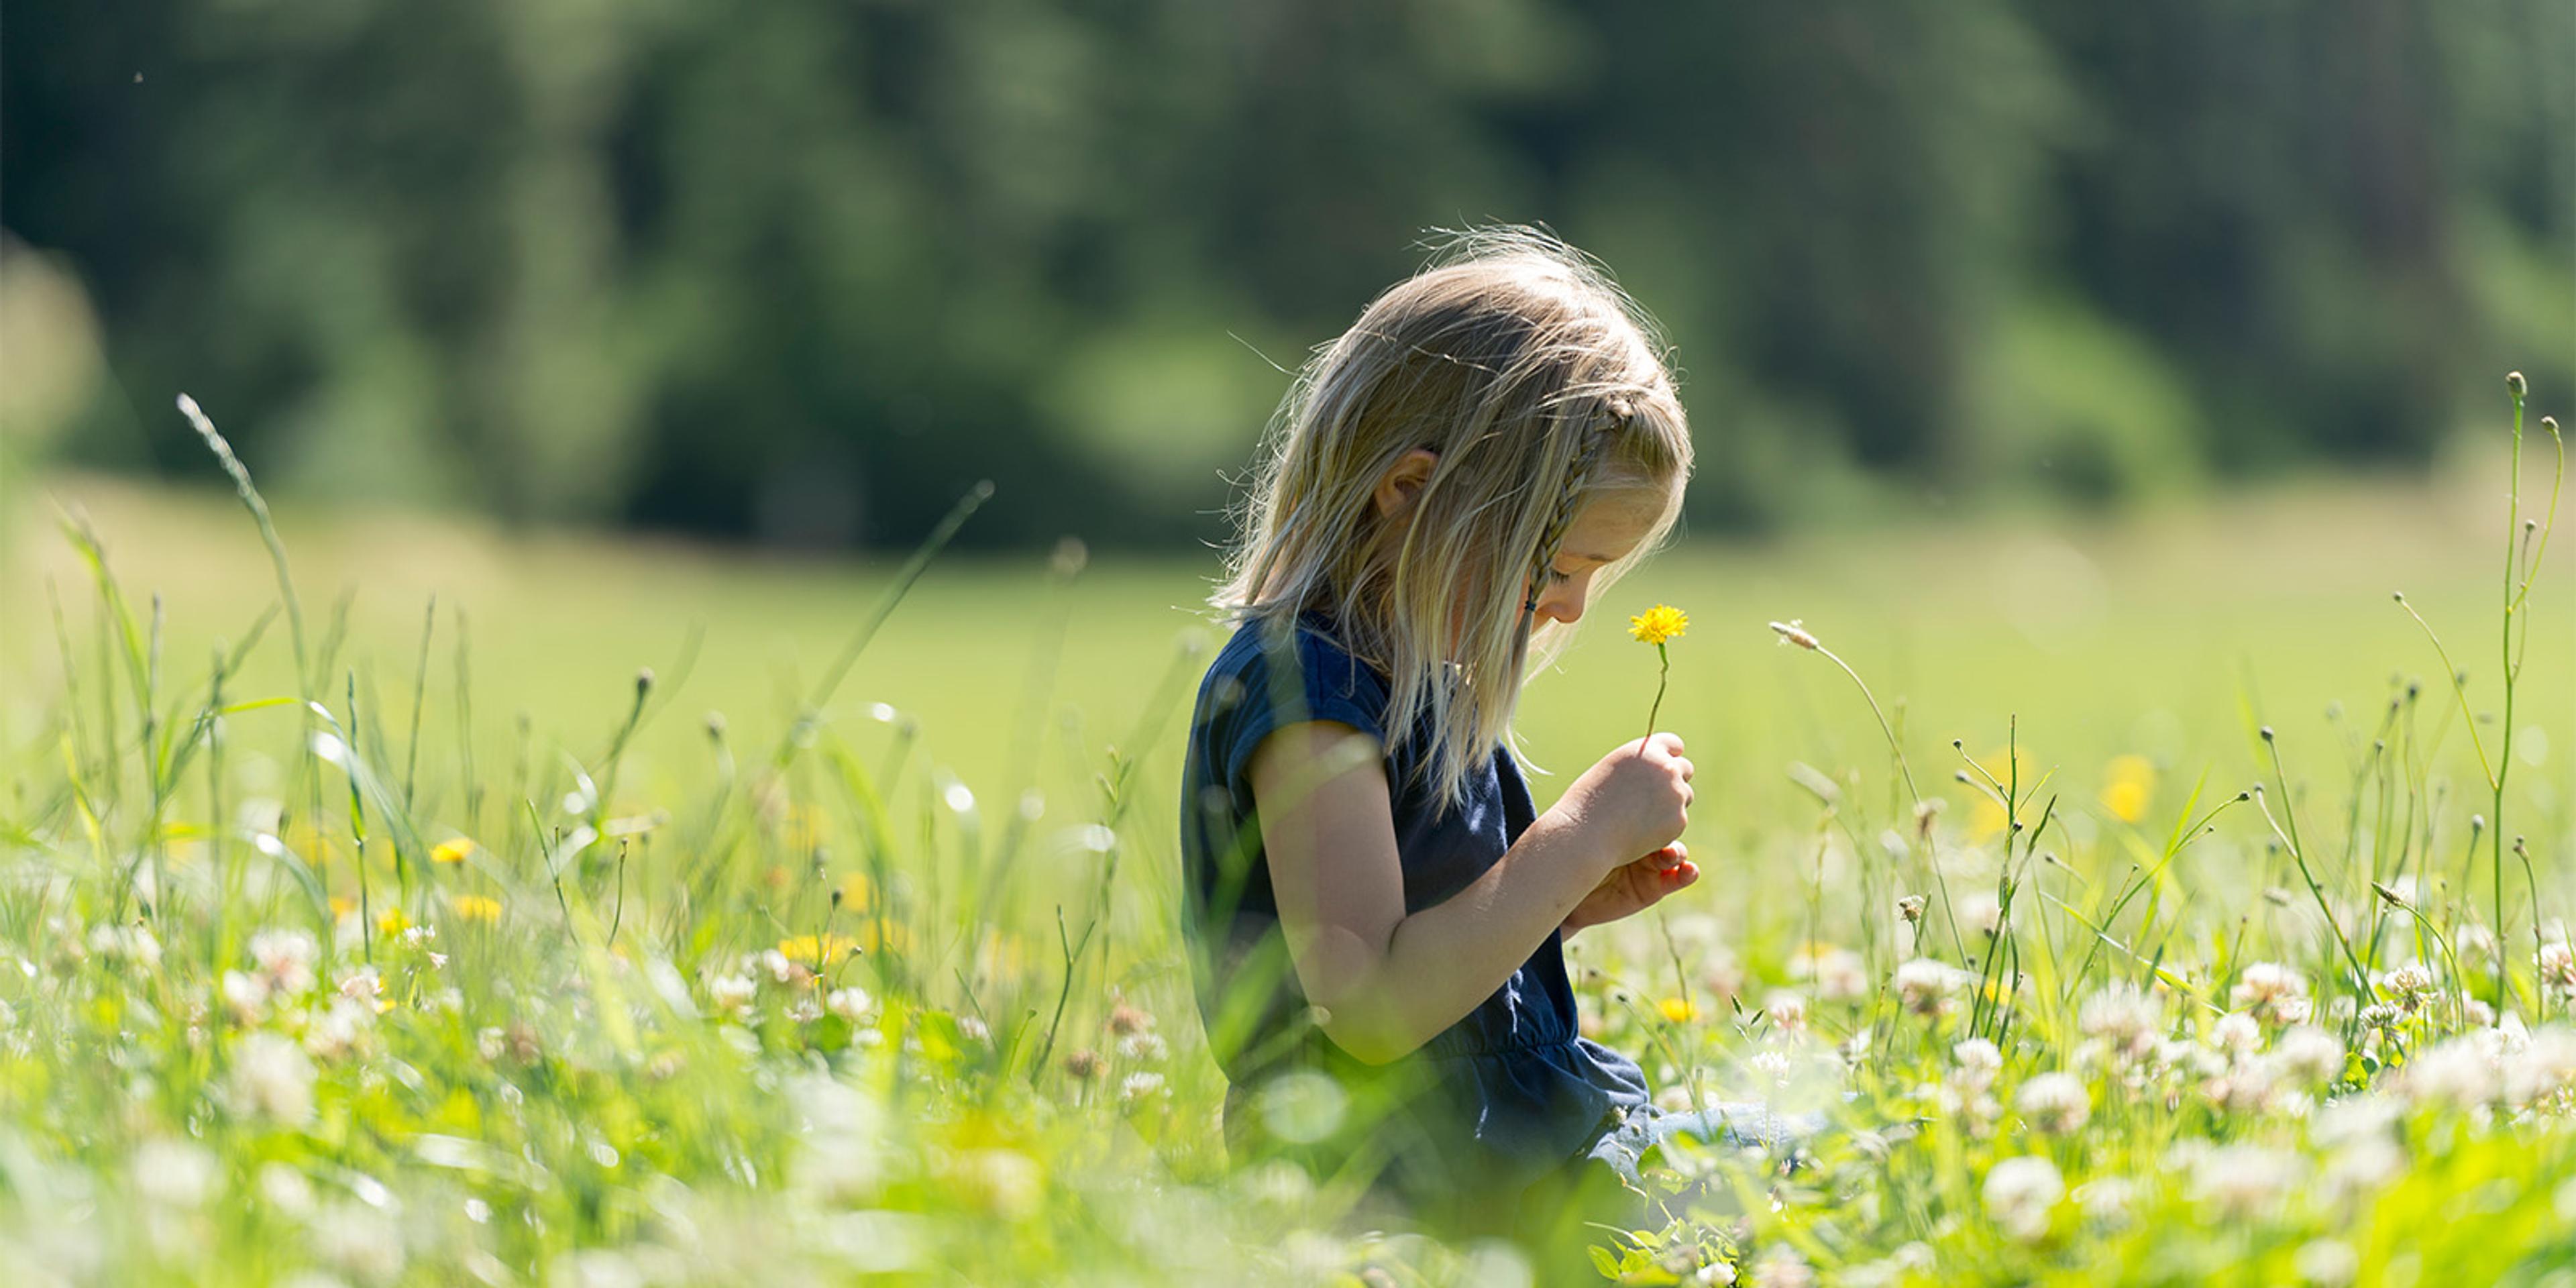 A girl sitting in a meadow holds a dandelion at the Pearson farm in Washington.